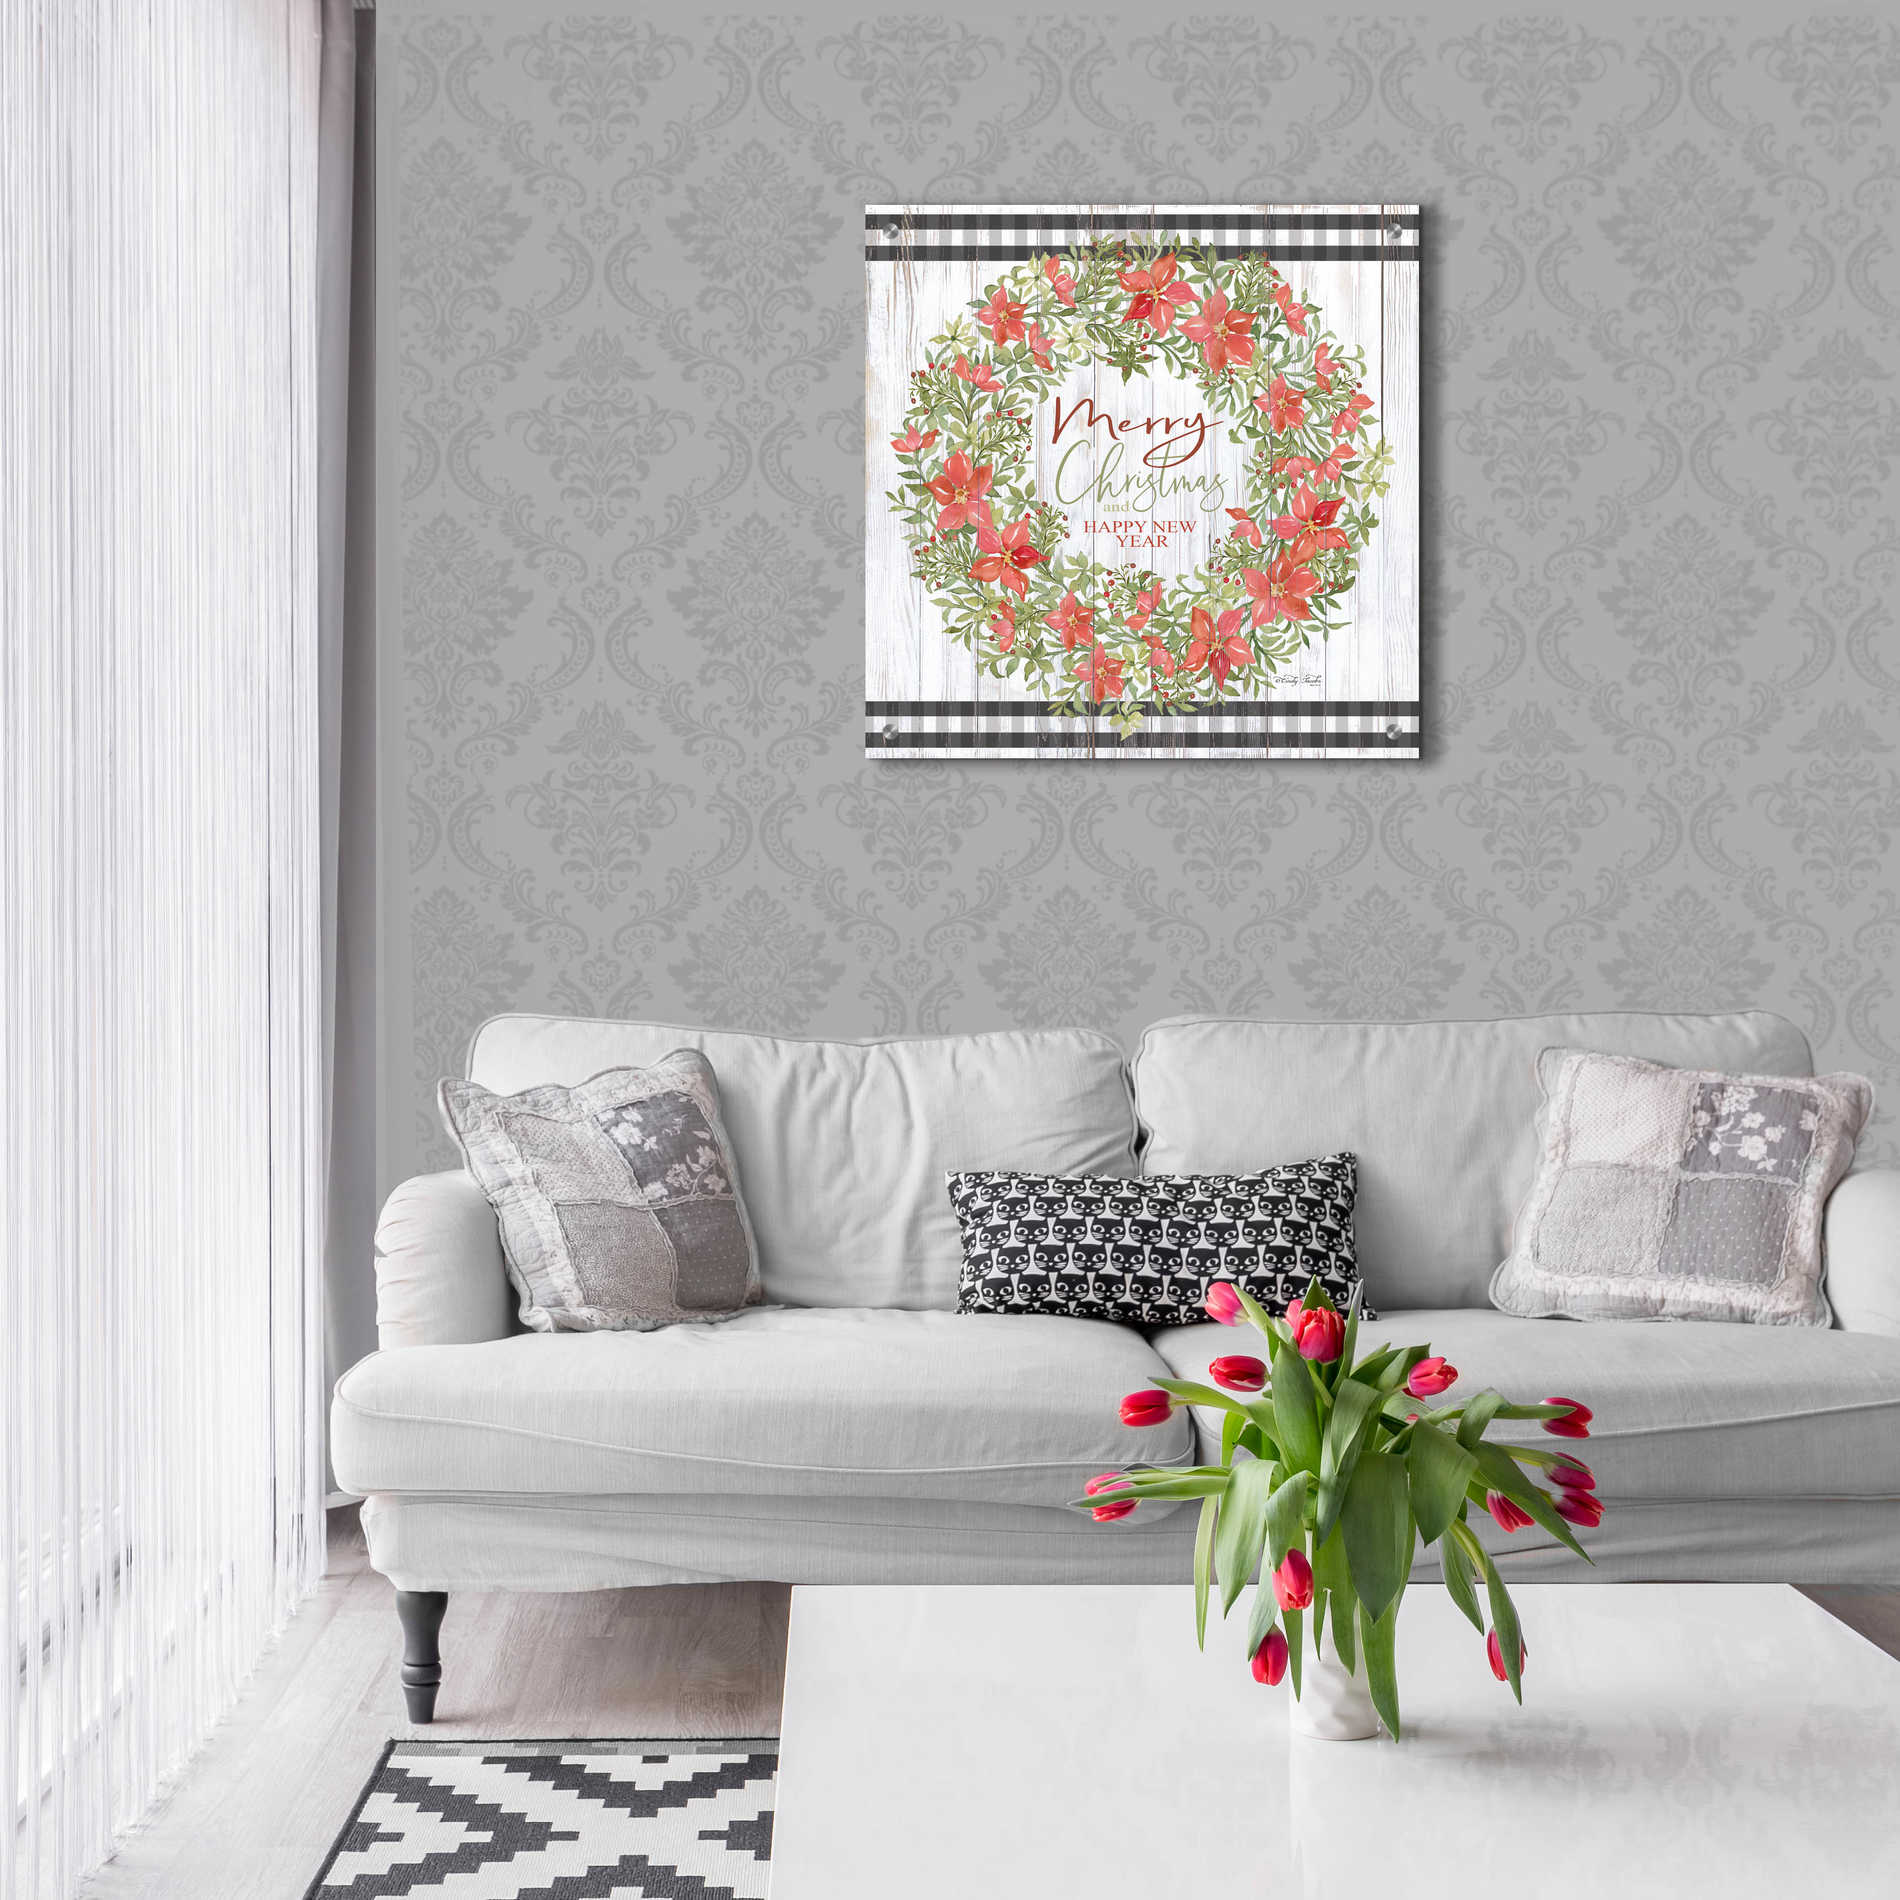 Epic Art 'Merry Christmas & Happy New Year Wreath' by Cindy Jacobs, Acrylic Glass Wall Art,24x24